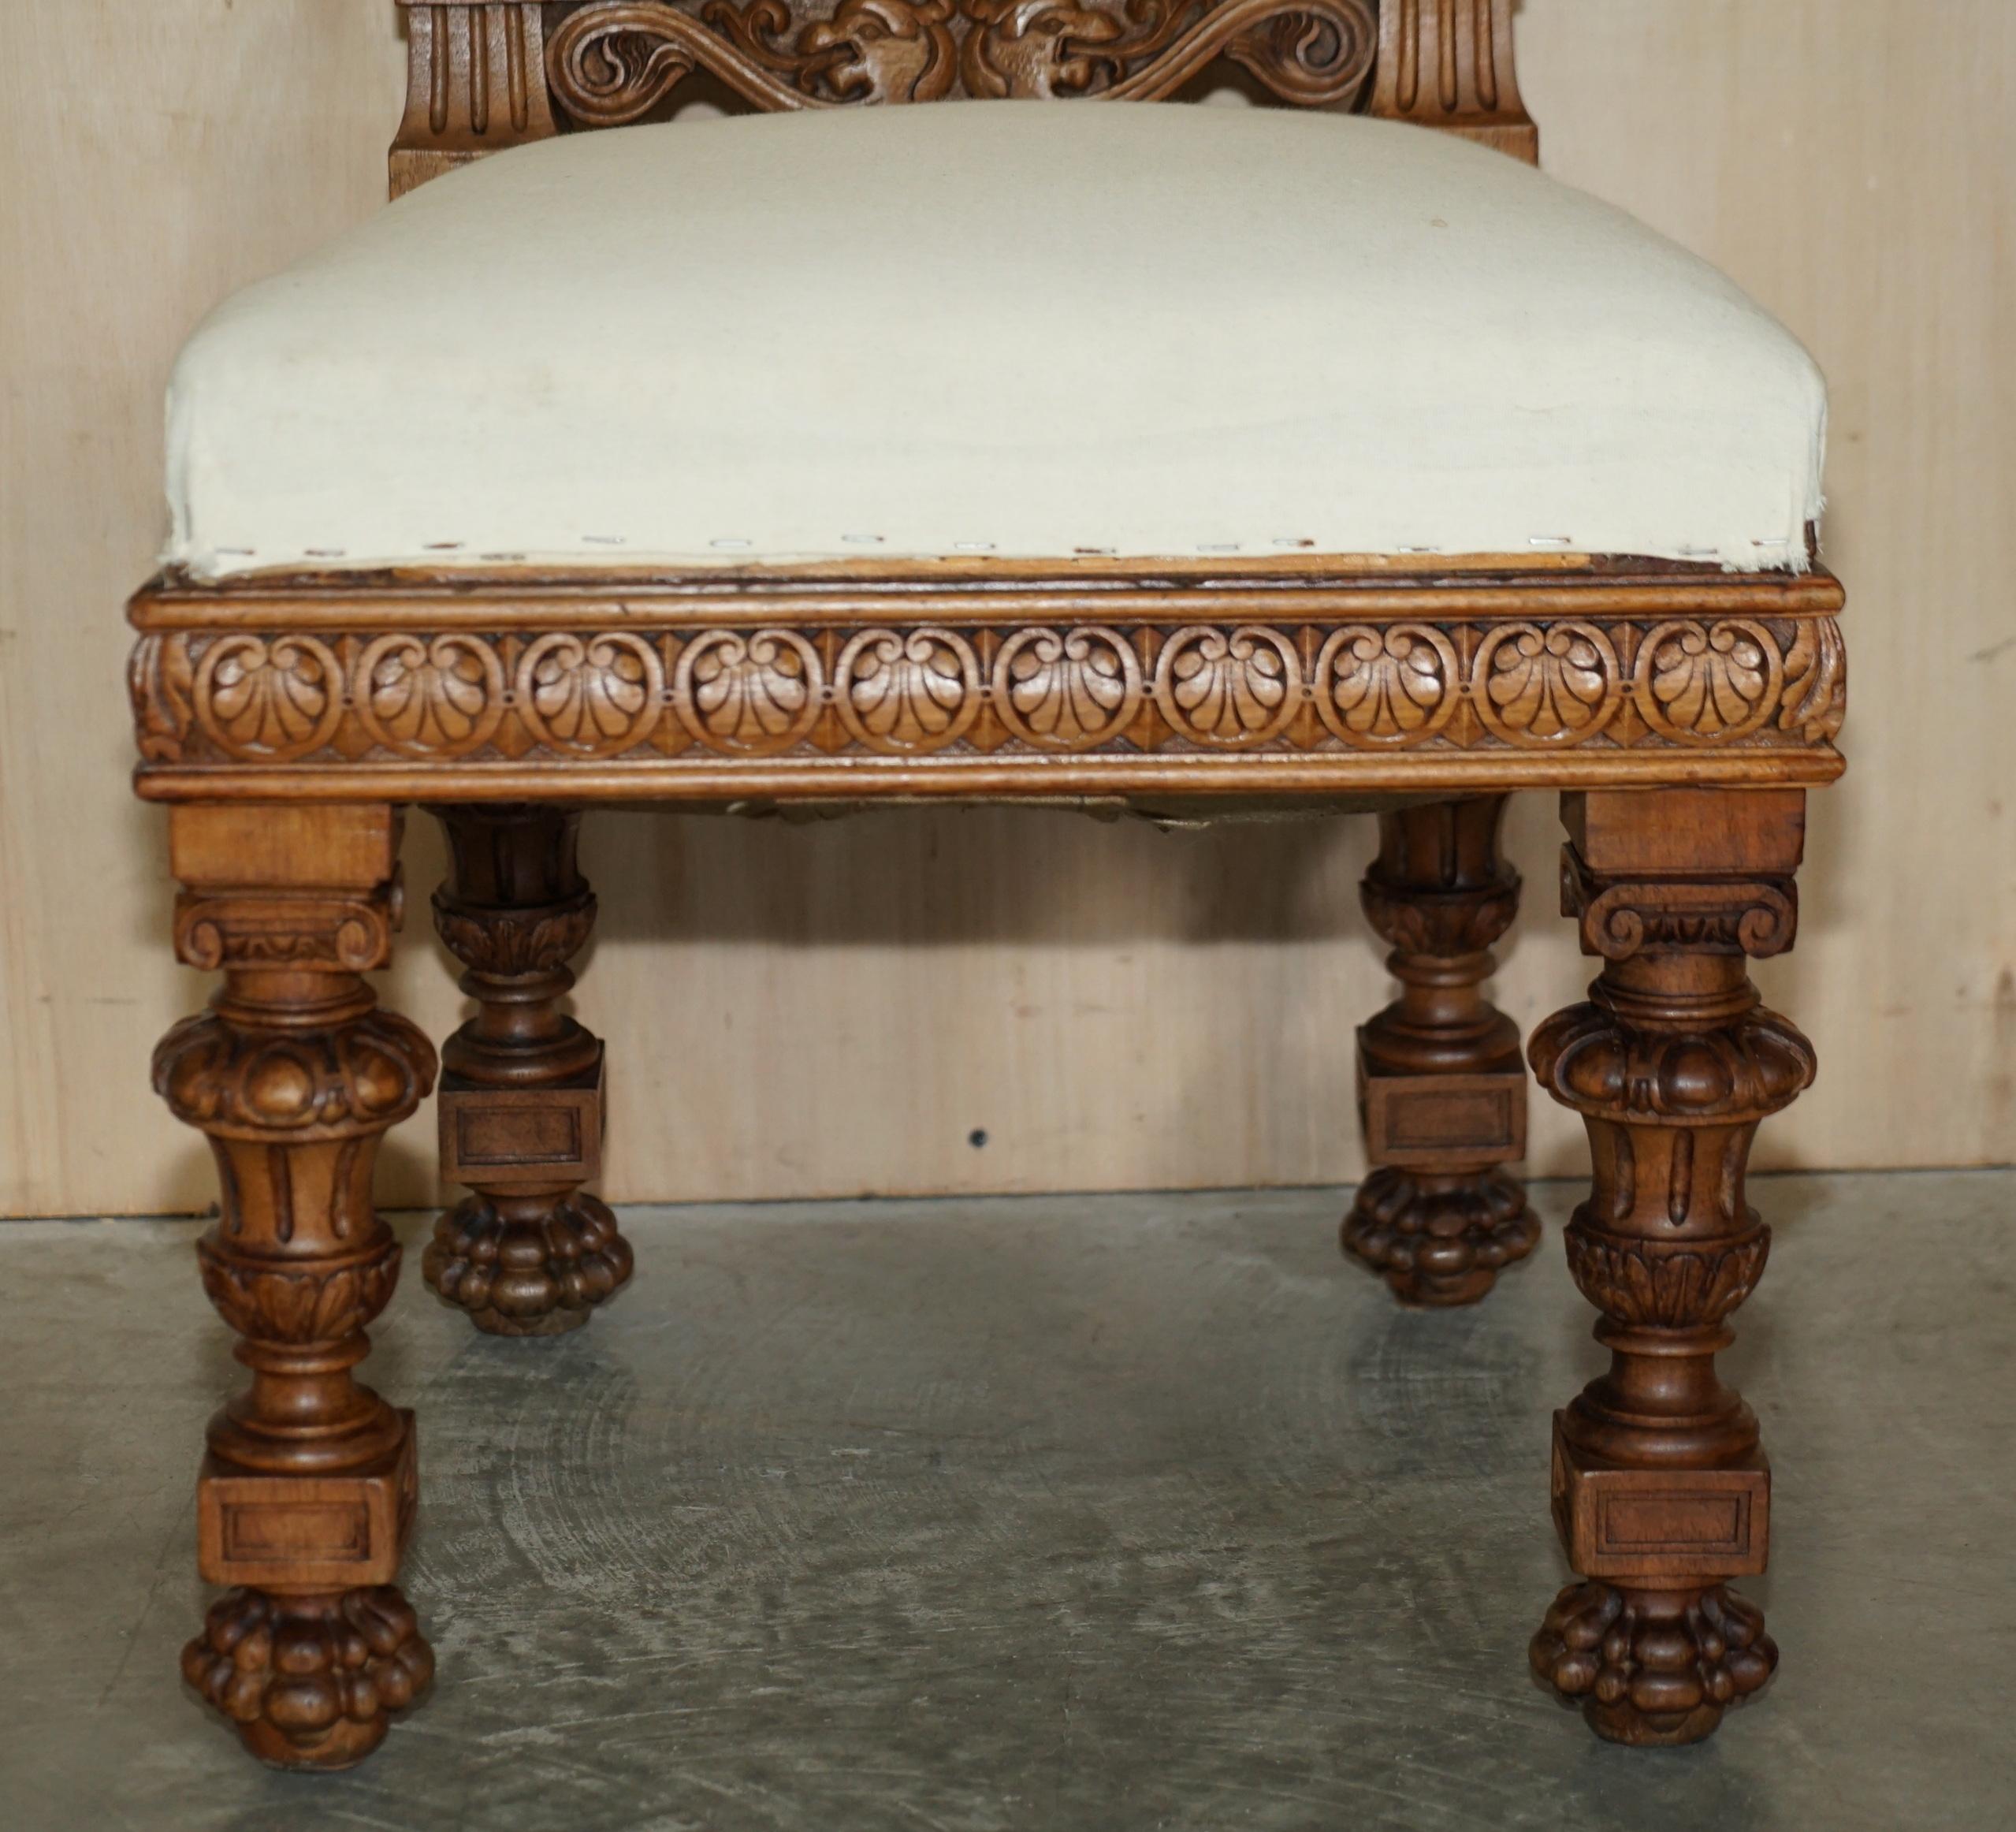 Pair of Ornate Carved Antique Italian Throne Chairs with Griffins / Dragons For Sale 6